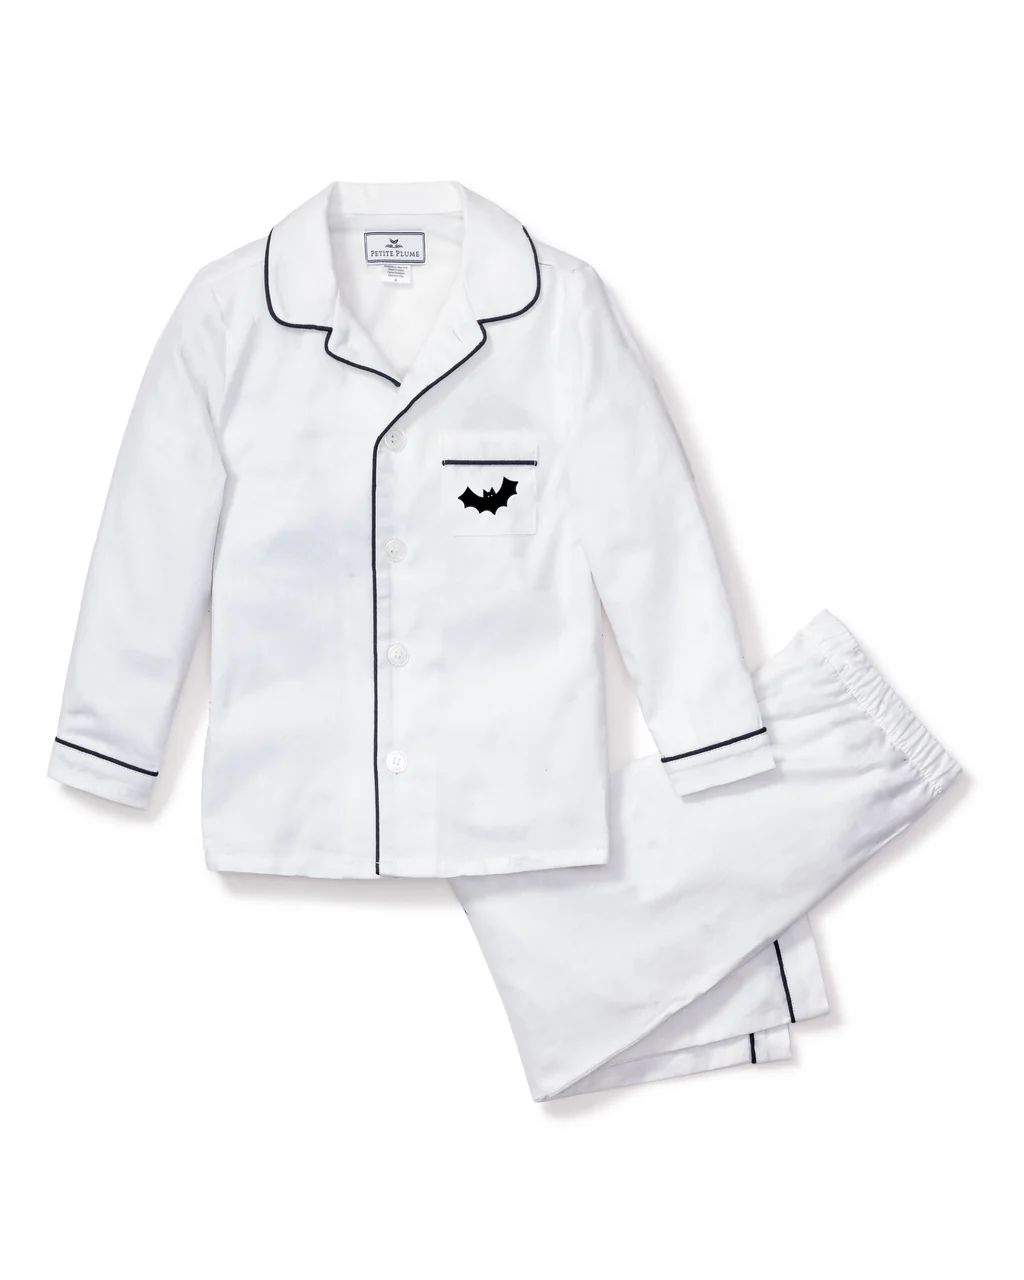 Halloween Limited Edition - White Pajama Sets with Bat Embroidery | Petite Plume